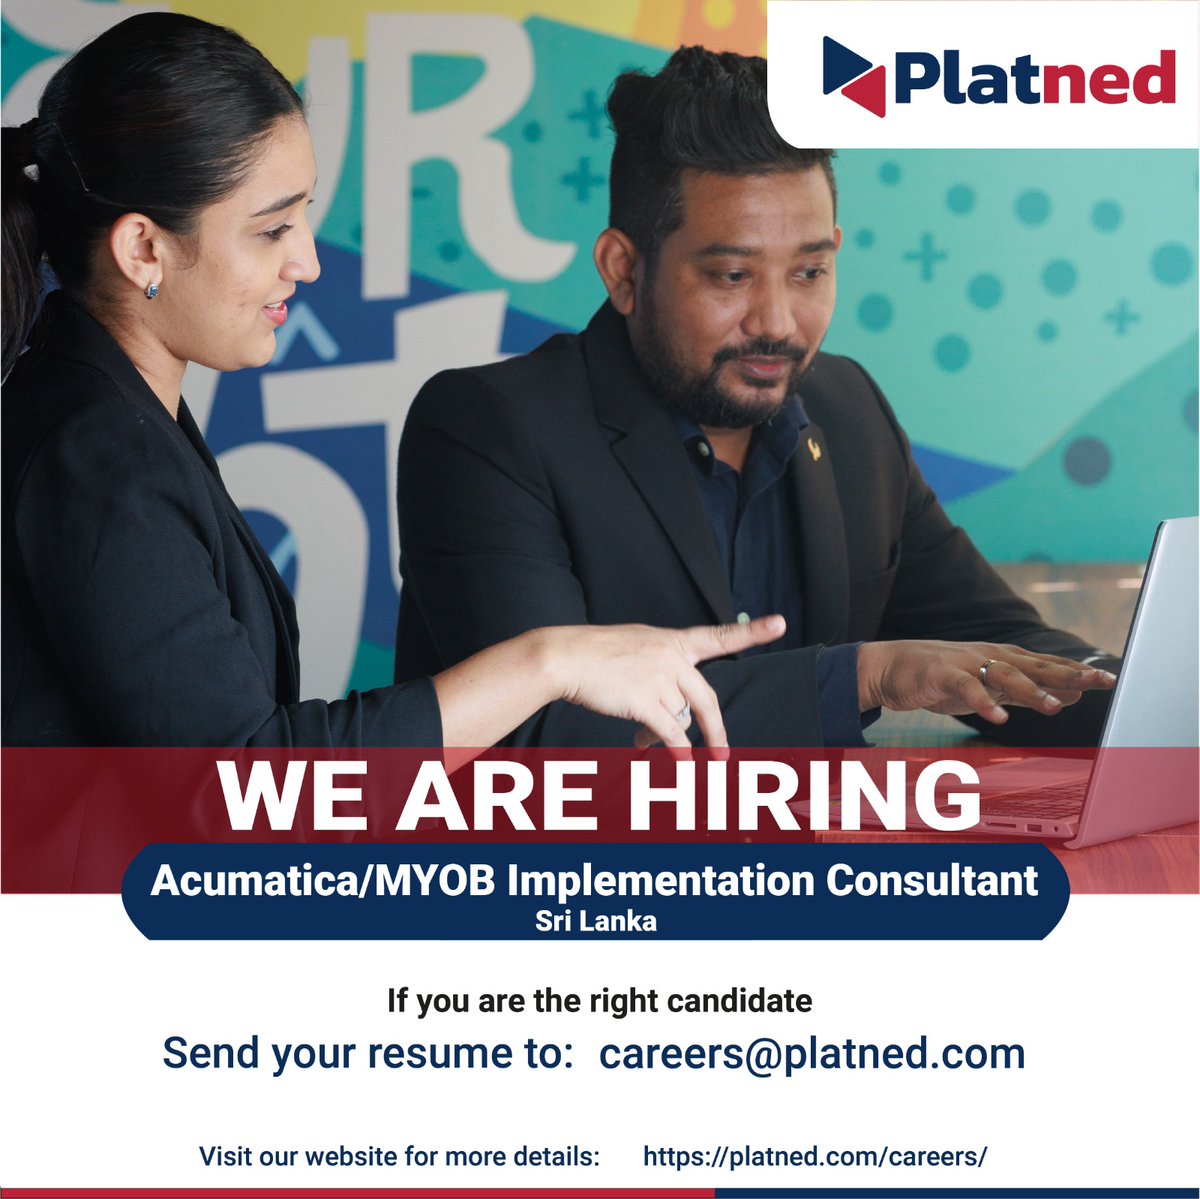 Join our dynamic team in Sri Lanka! Platned is on the lookout for an experienced Acumatica/MYOB Implementation Consultant. 

Are you ready to be part of our growing team? Apply today via bit.ly/3w9alCS

#Platned #Hiring #Acumatica #MYOB #SriLanka